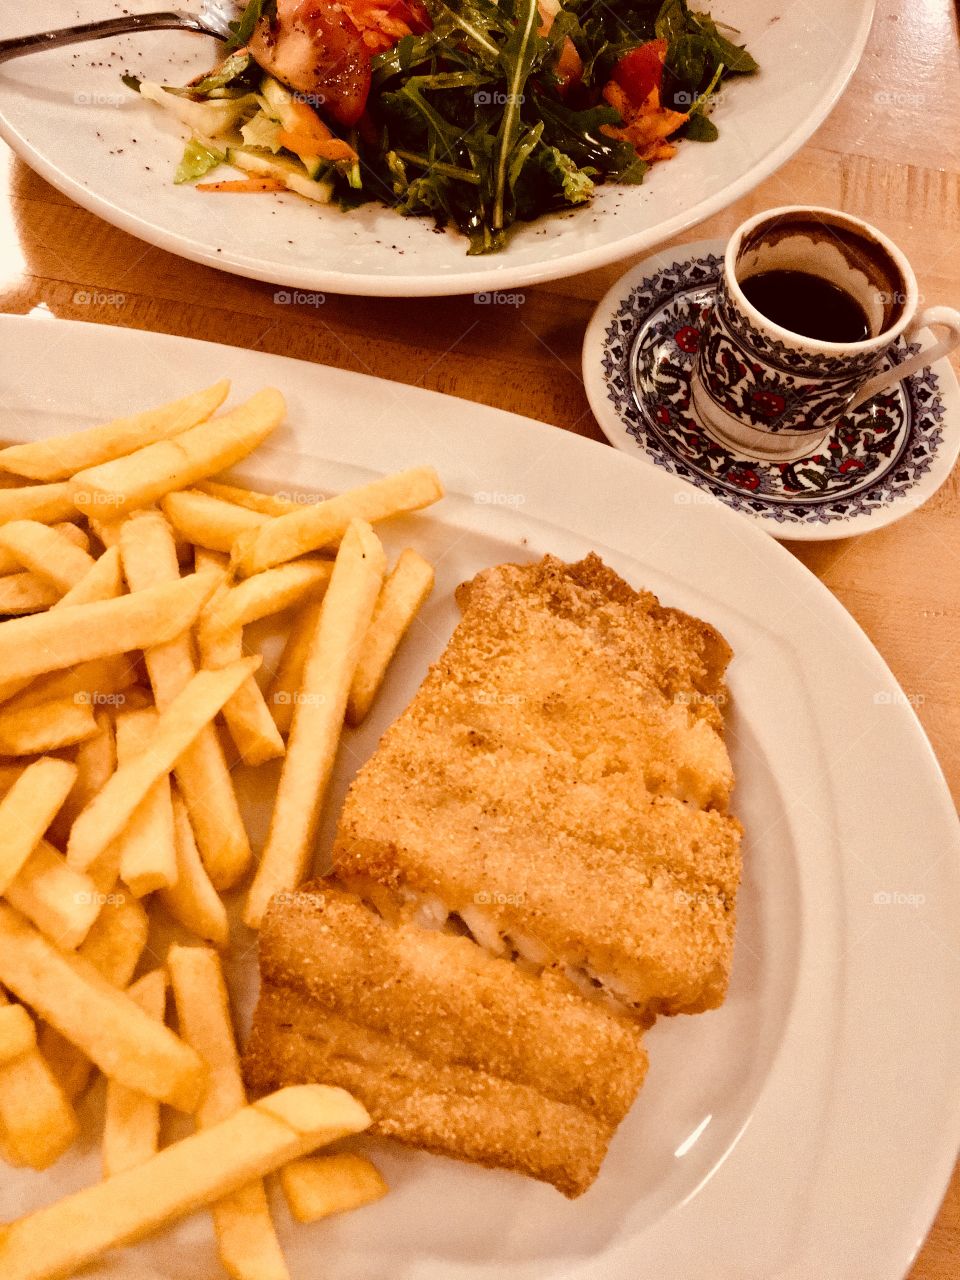 Fish, french fries and Coffee